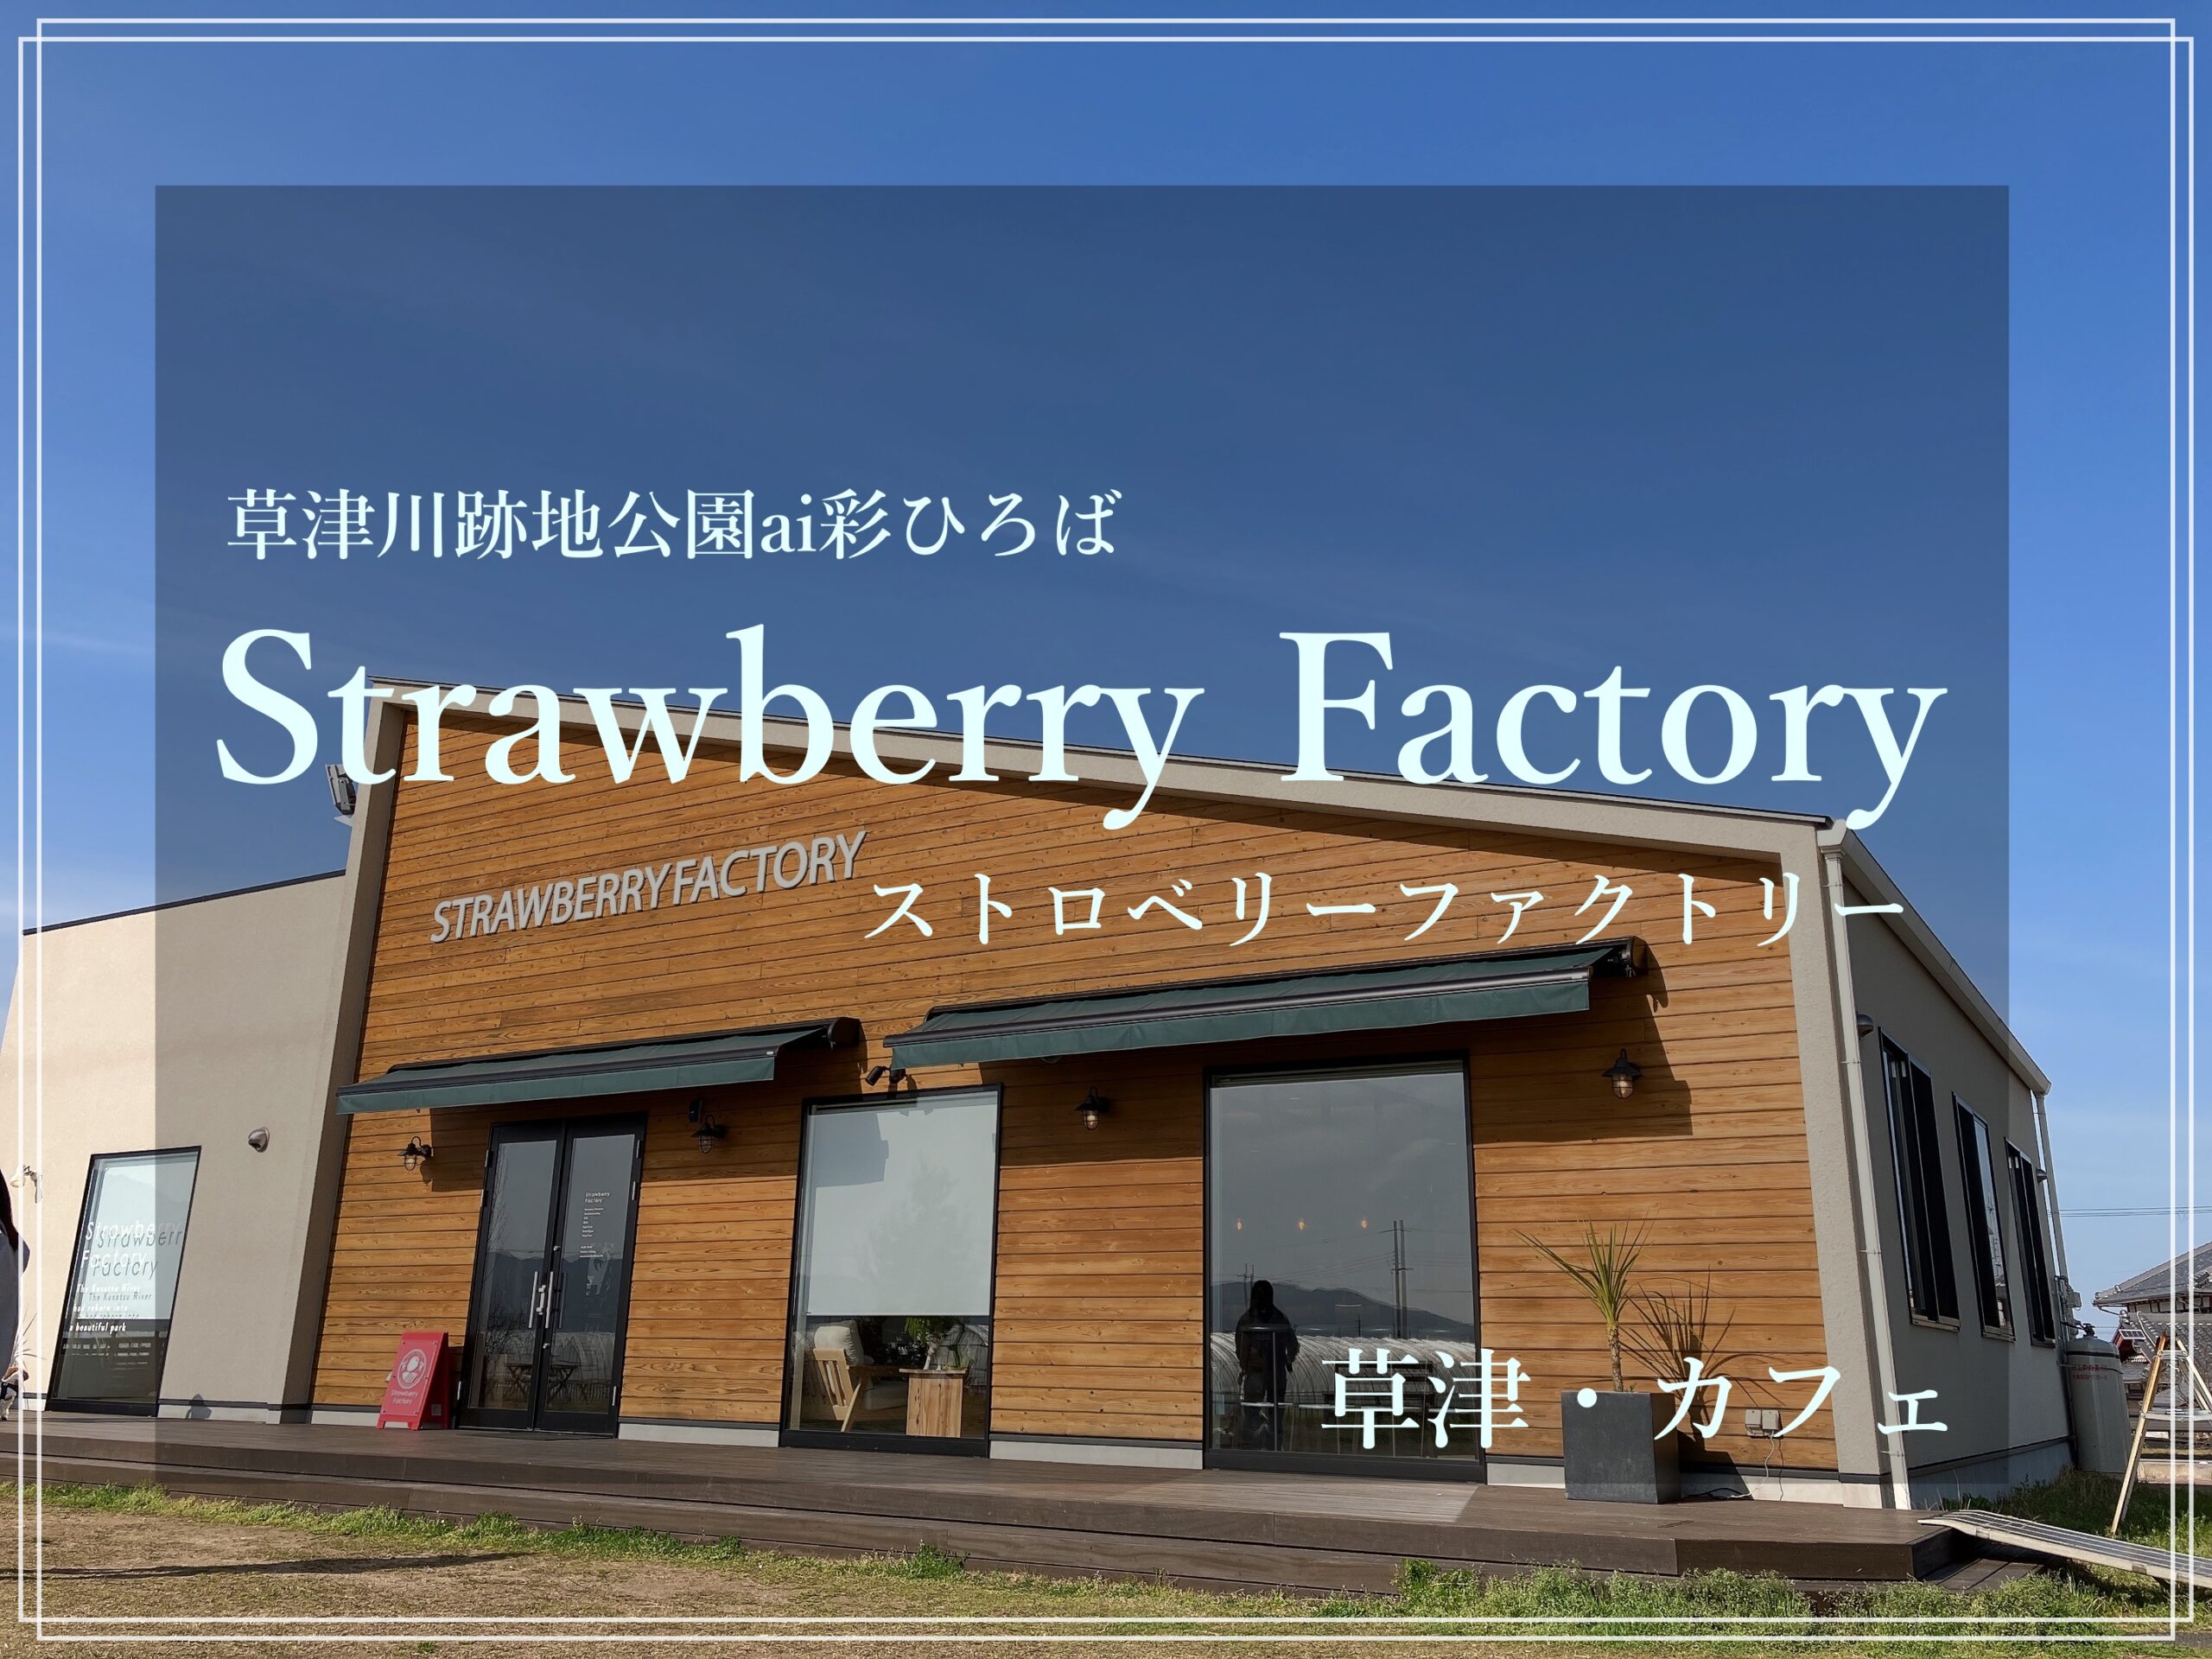 Strawberry Factory